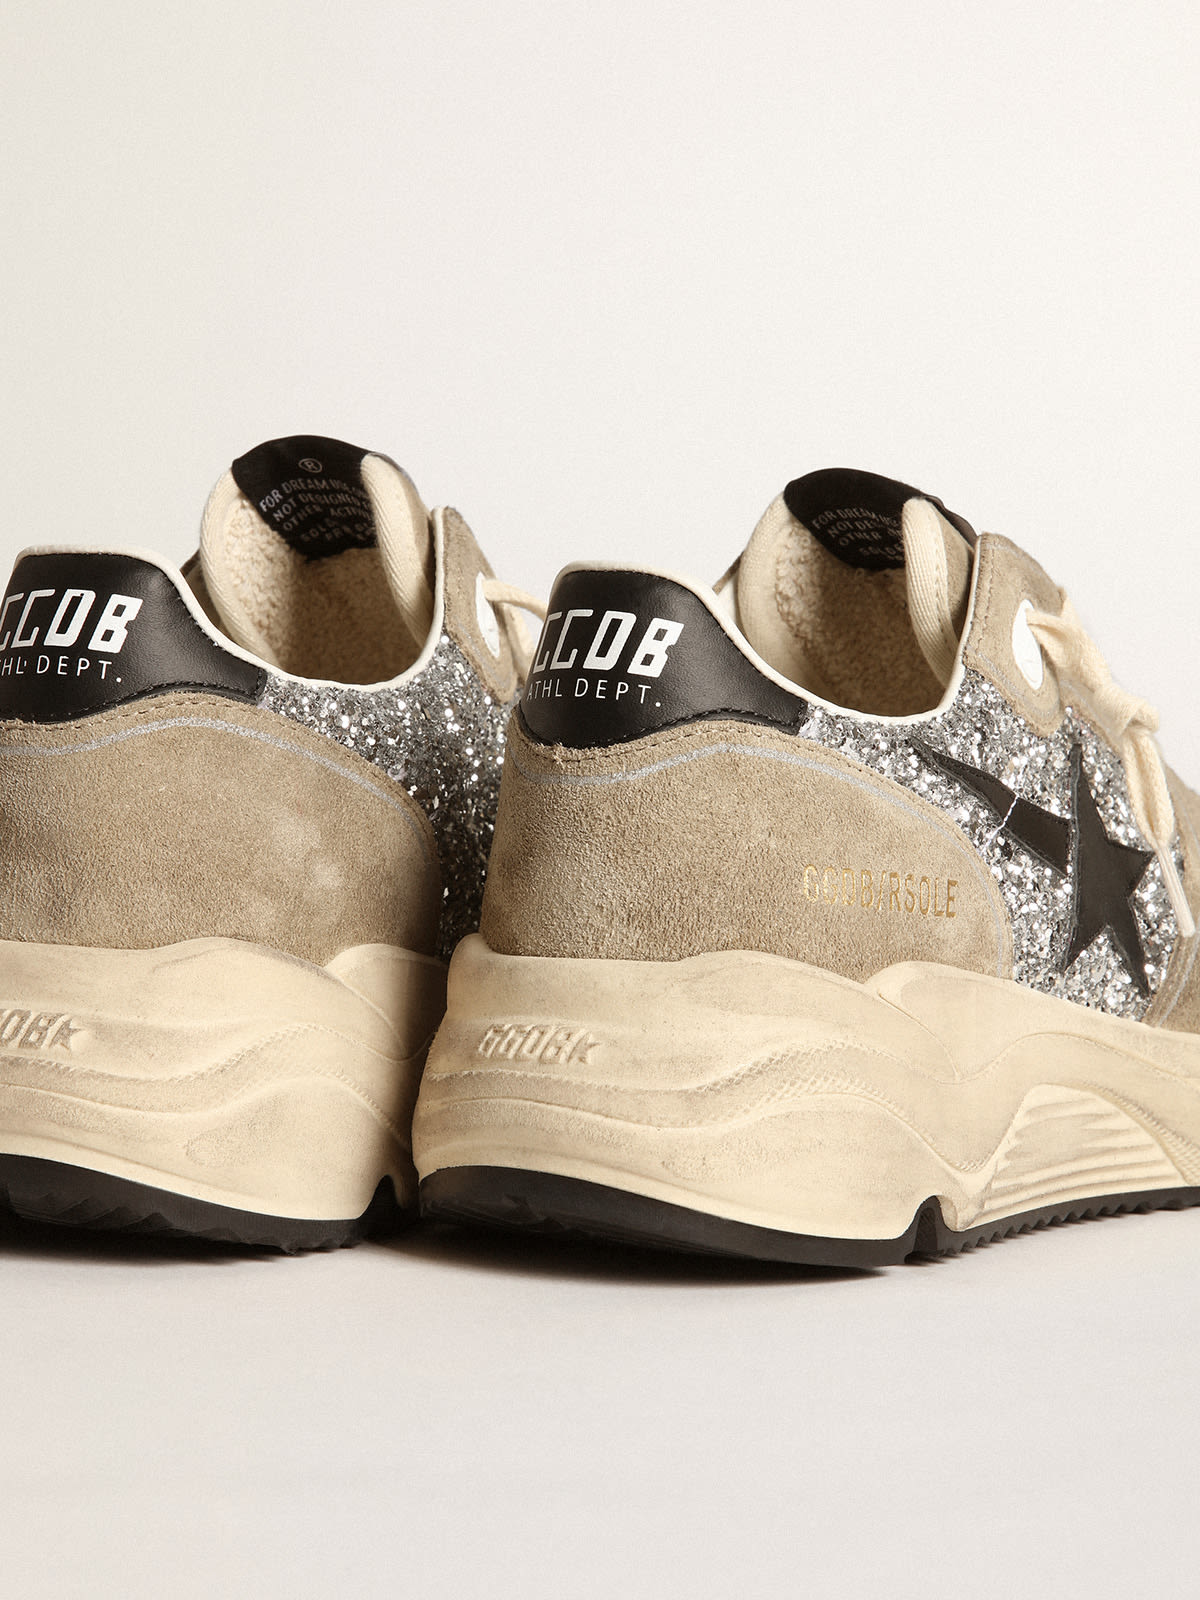 Golden Goose - Women's Running Sole in silver glitter and dove gray suede in 